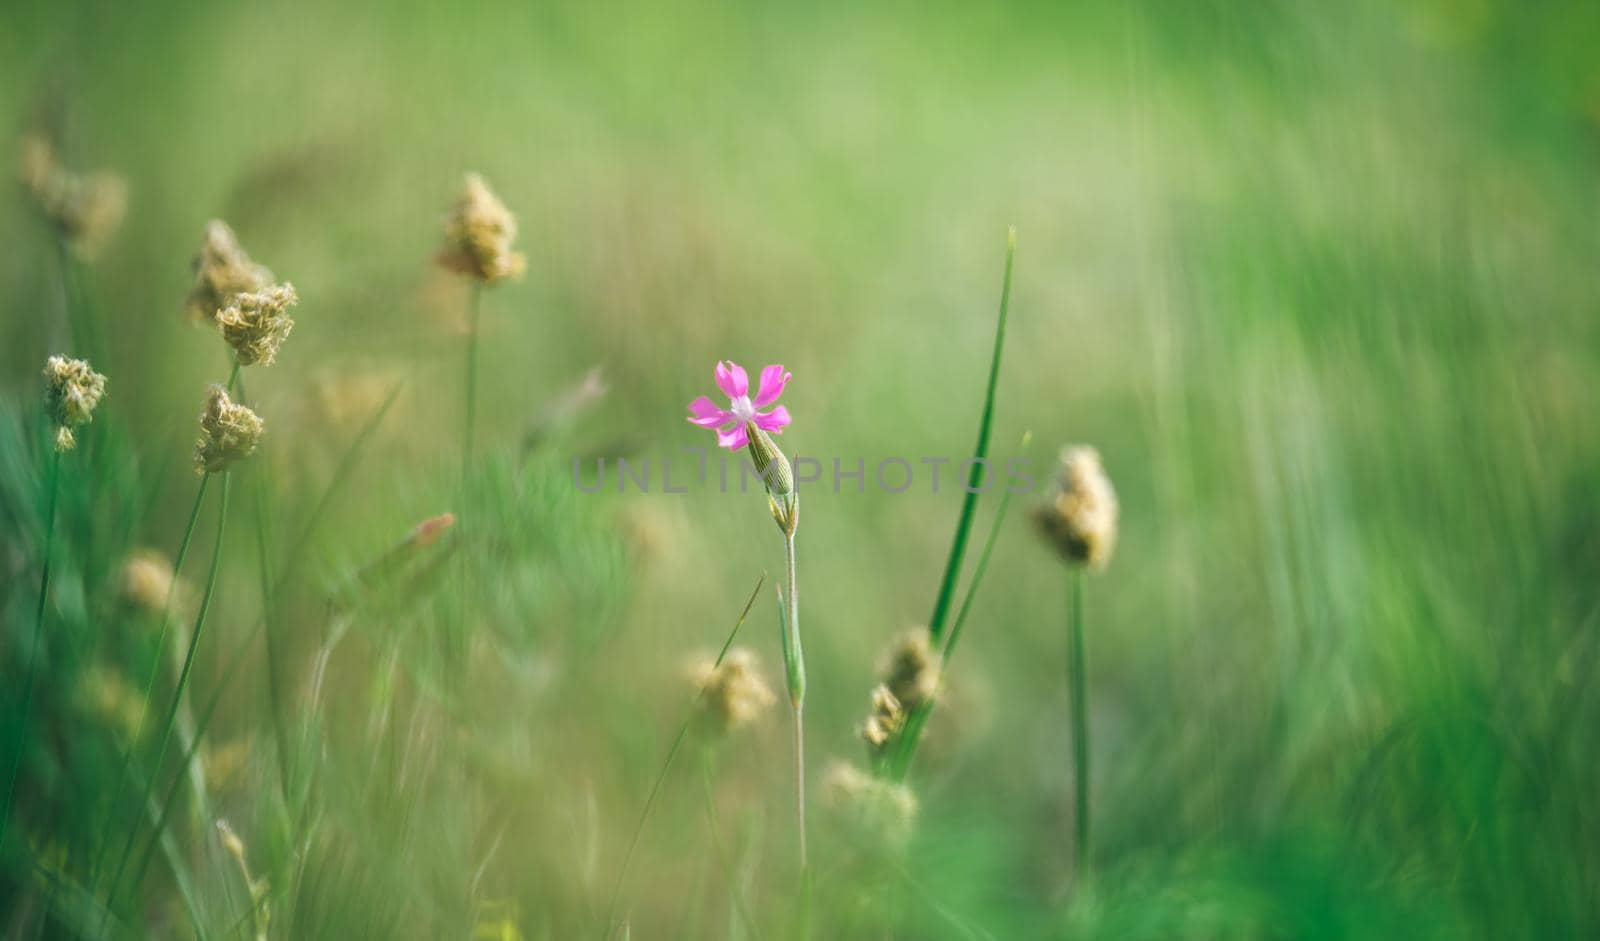 Delicate purple flower in a field on nature in sunlight on a light green background macro. Wild flower in a spring, summer background Border template for design. An airy gentle artistic image. Download photo